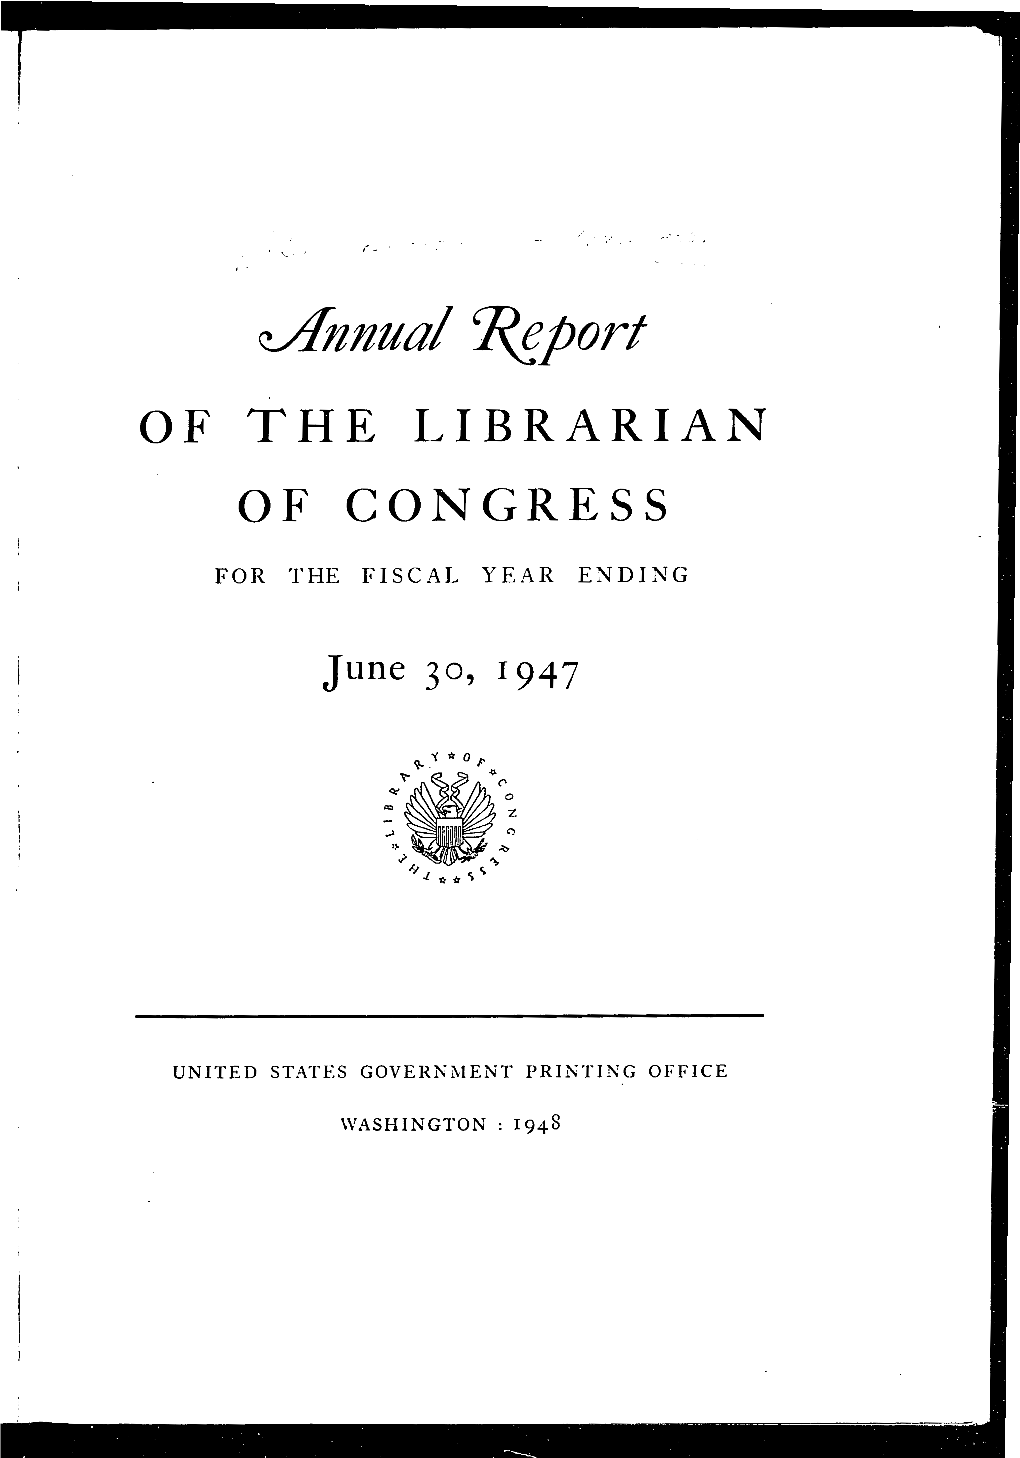 Annual Report of the Librarian of Congress. 1947